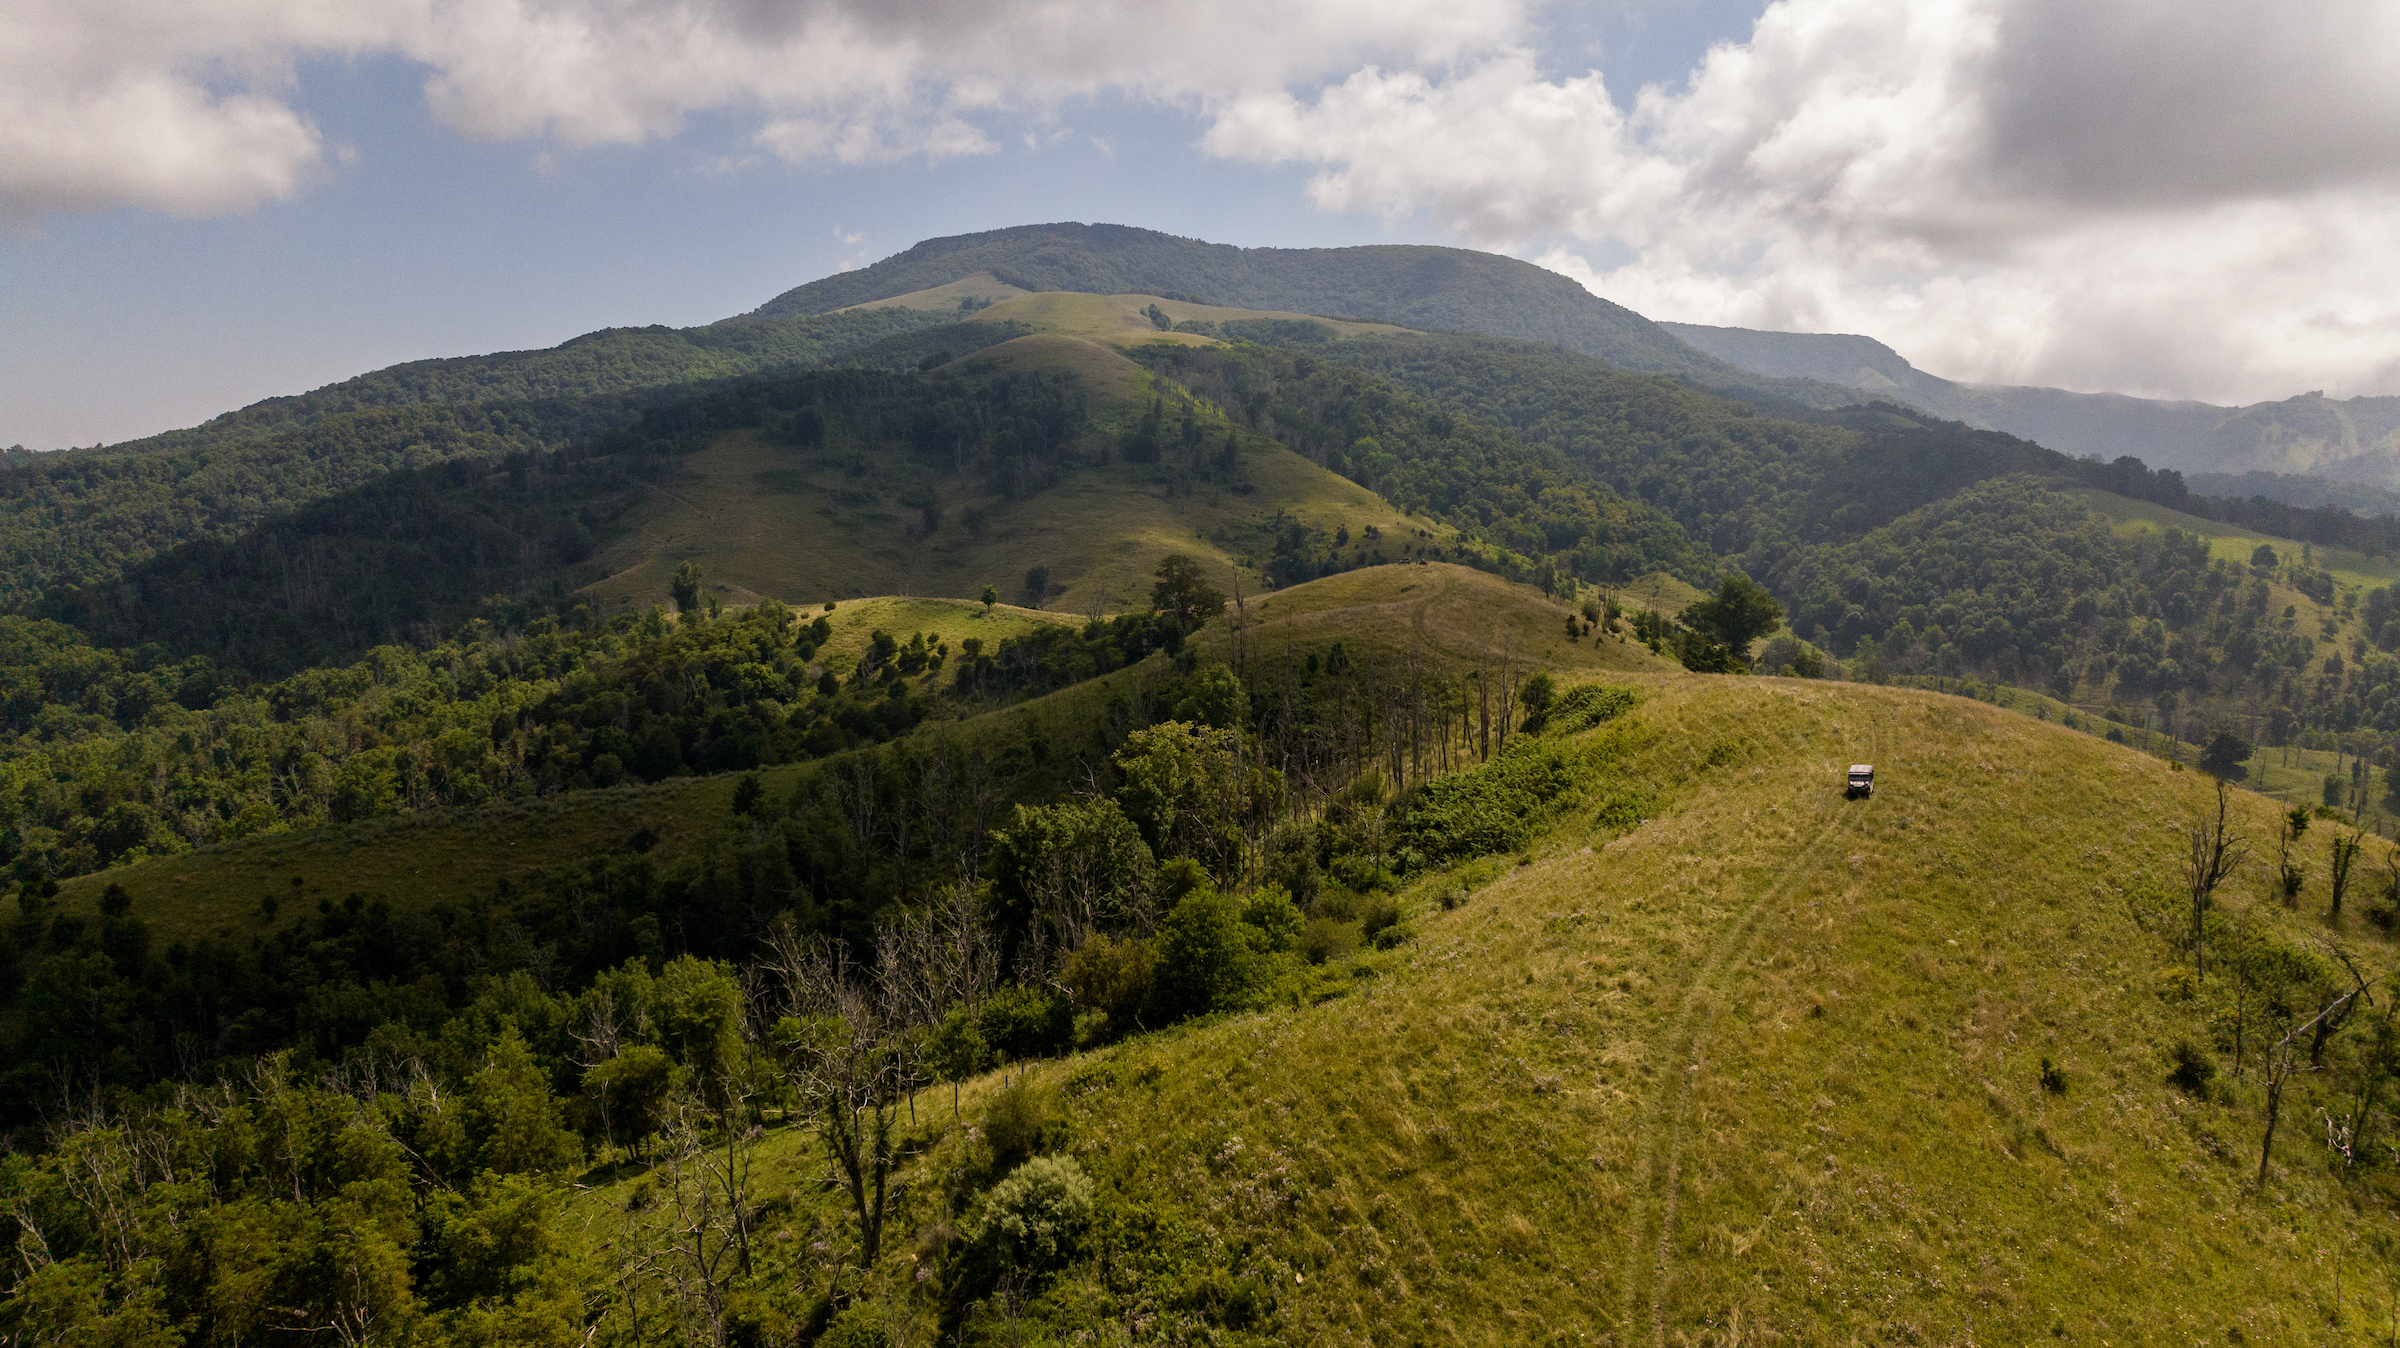 Aerial drone view of a large forested mountain ridge. A utility terrain vehicle drives along a curving, unpaved mountain track heading towards the summit.